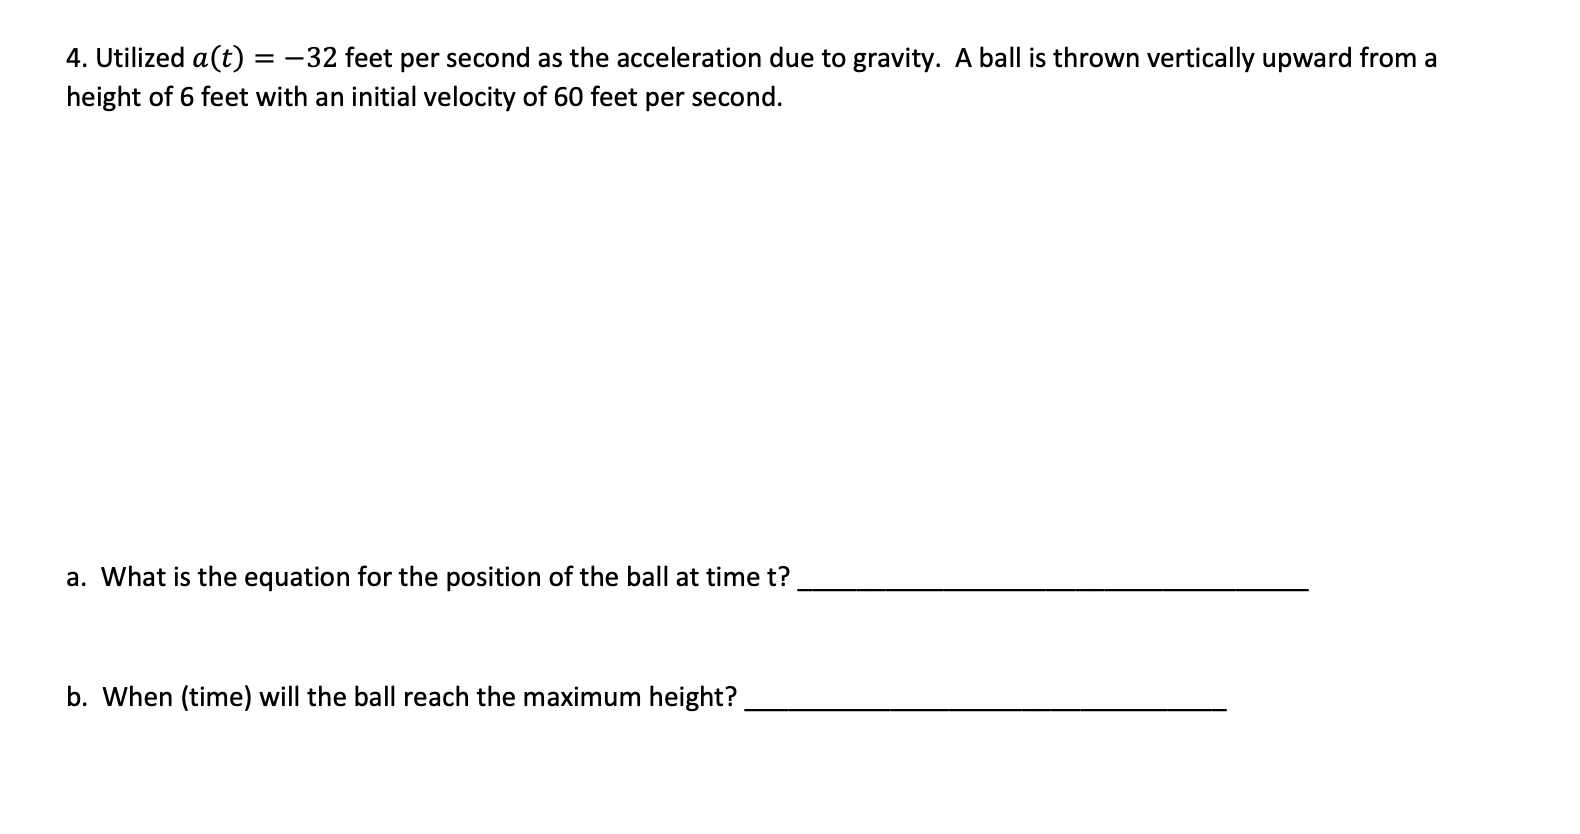 4. Utilized a(t) = -32 feet per second as the acceleration due to gravity. A ball is thrown vertically upward from a
height of 6 feet with an initial velocity of 60 feet per second.
a. What is the equation for the position of the ball at time t?
b. When (time) will the ball reach the maximum height?
